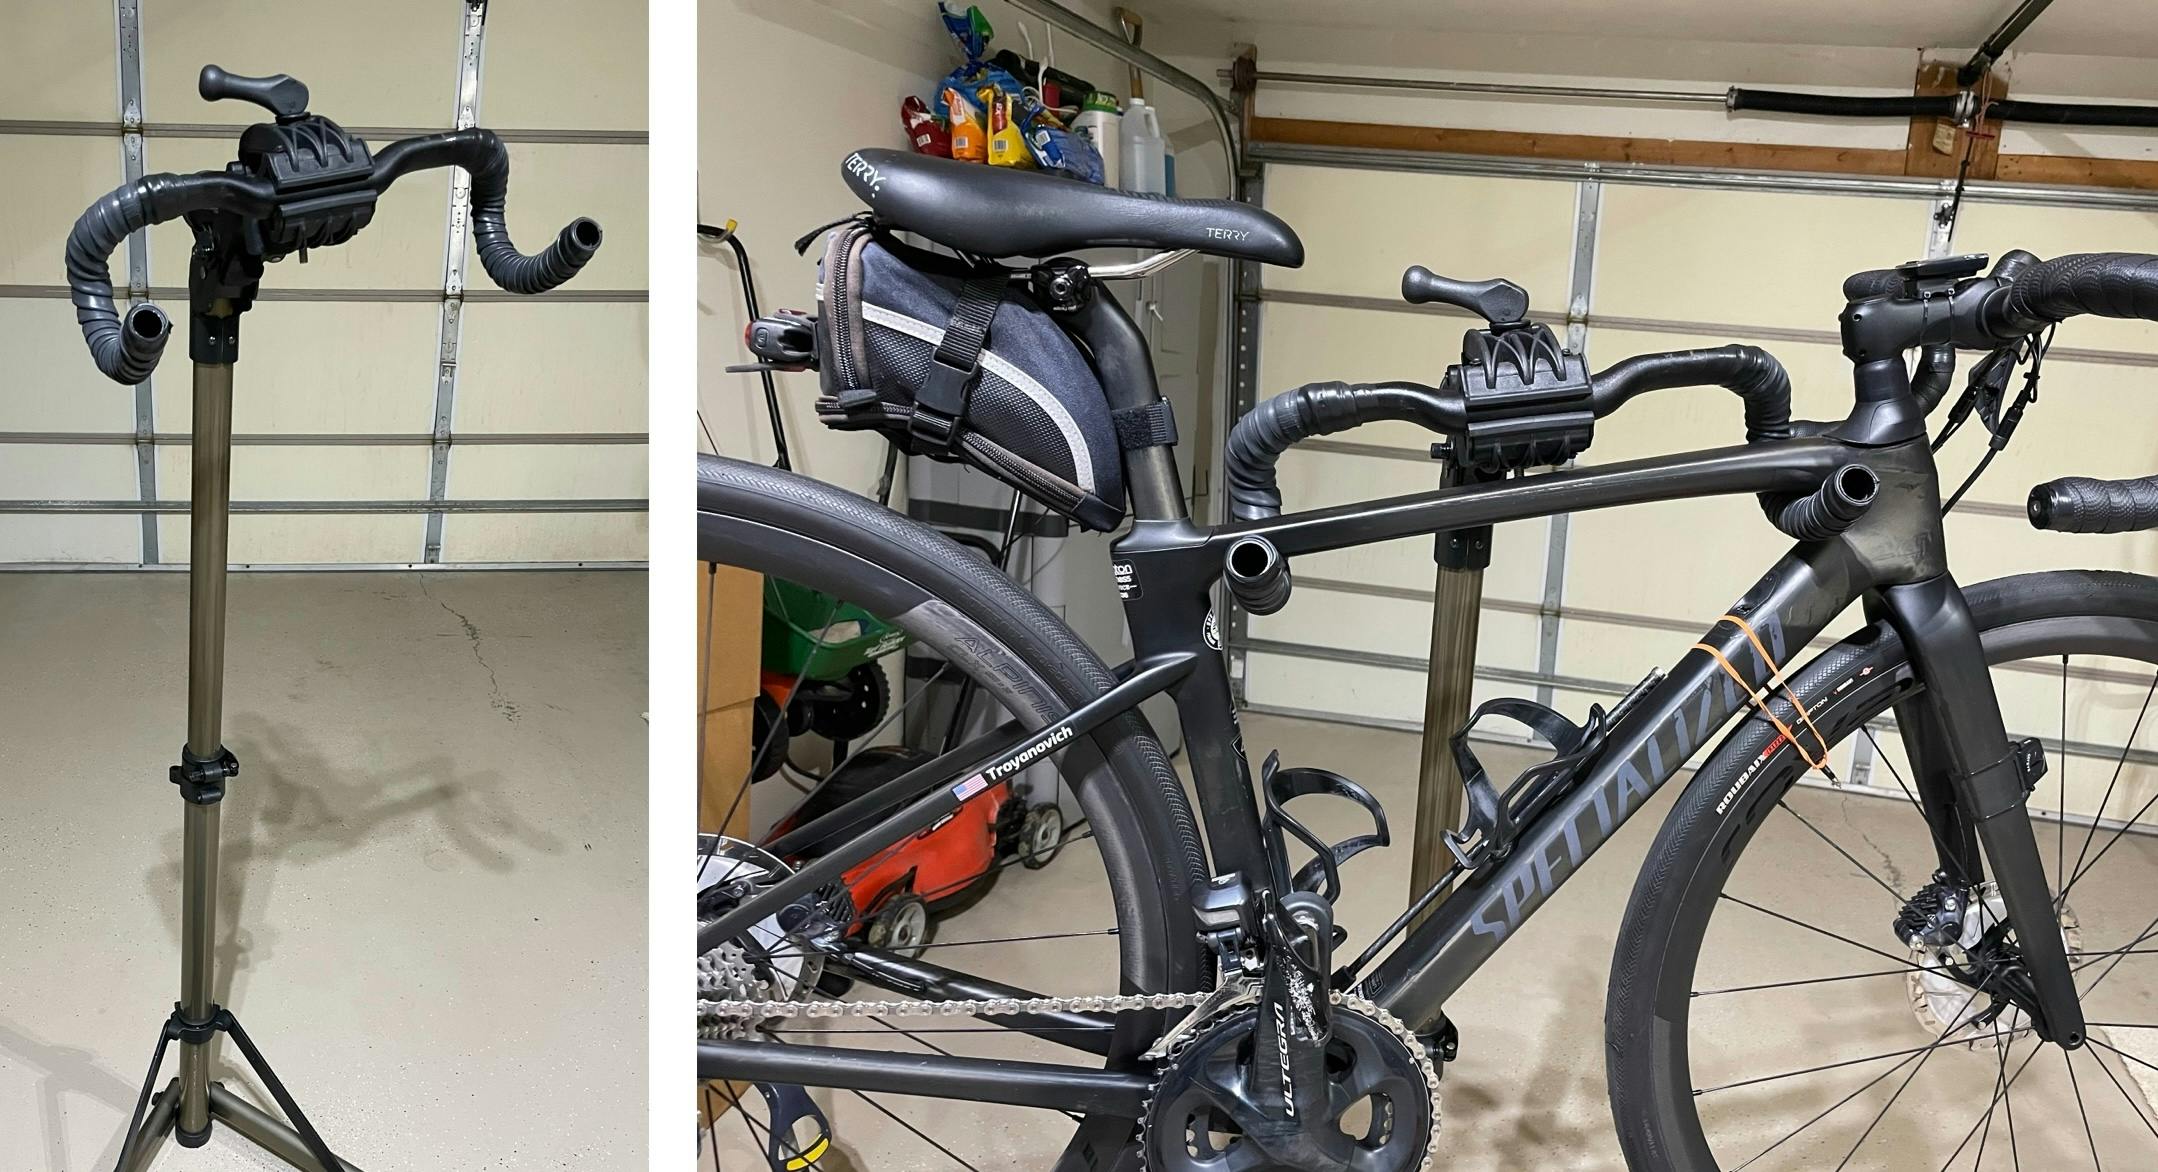 Modified Work Stand Top Tube “Cradle”